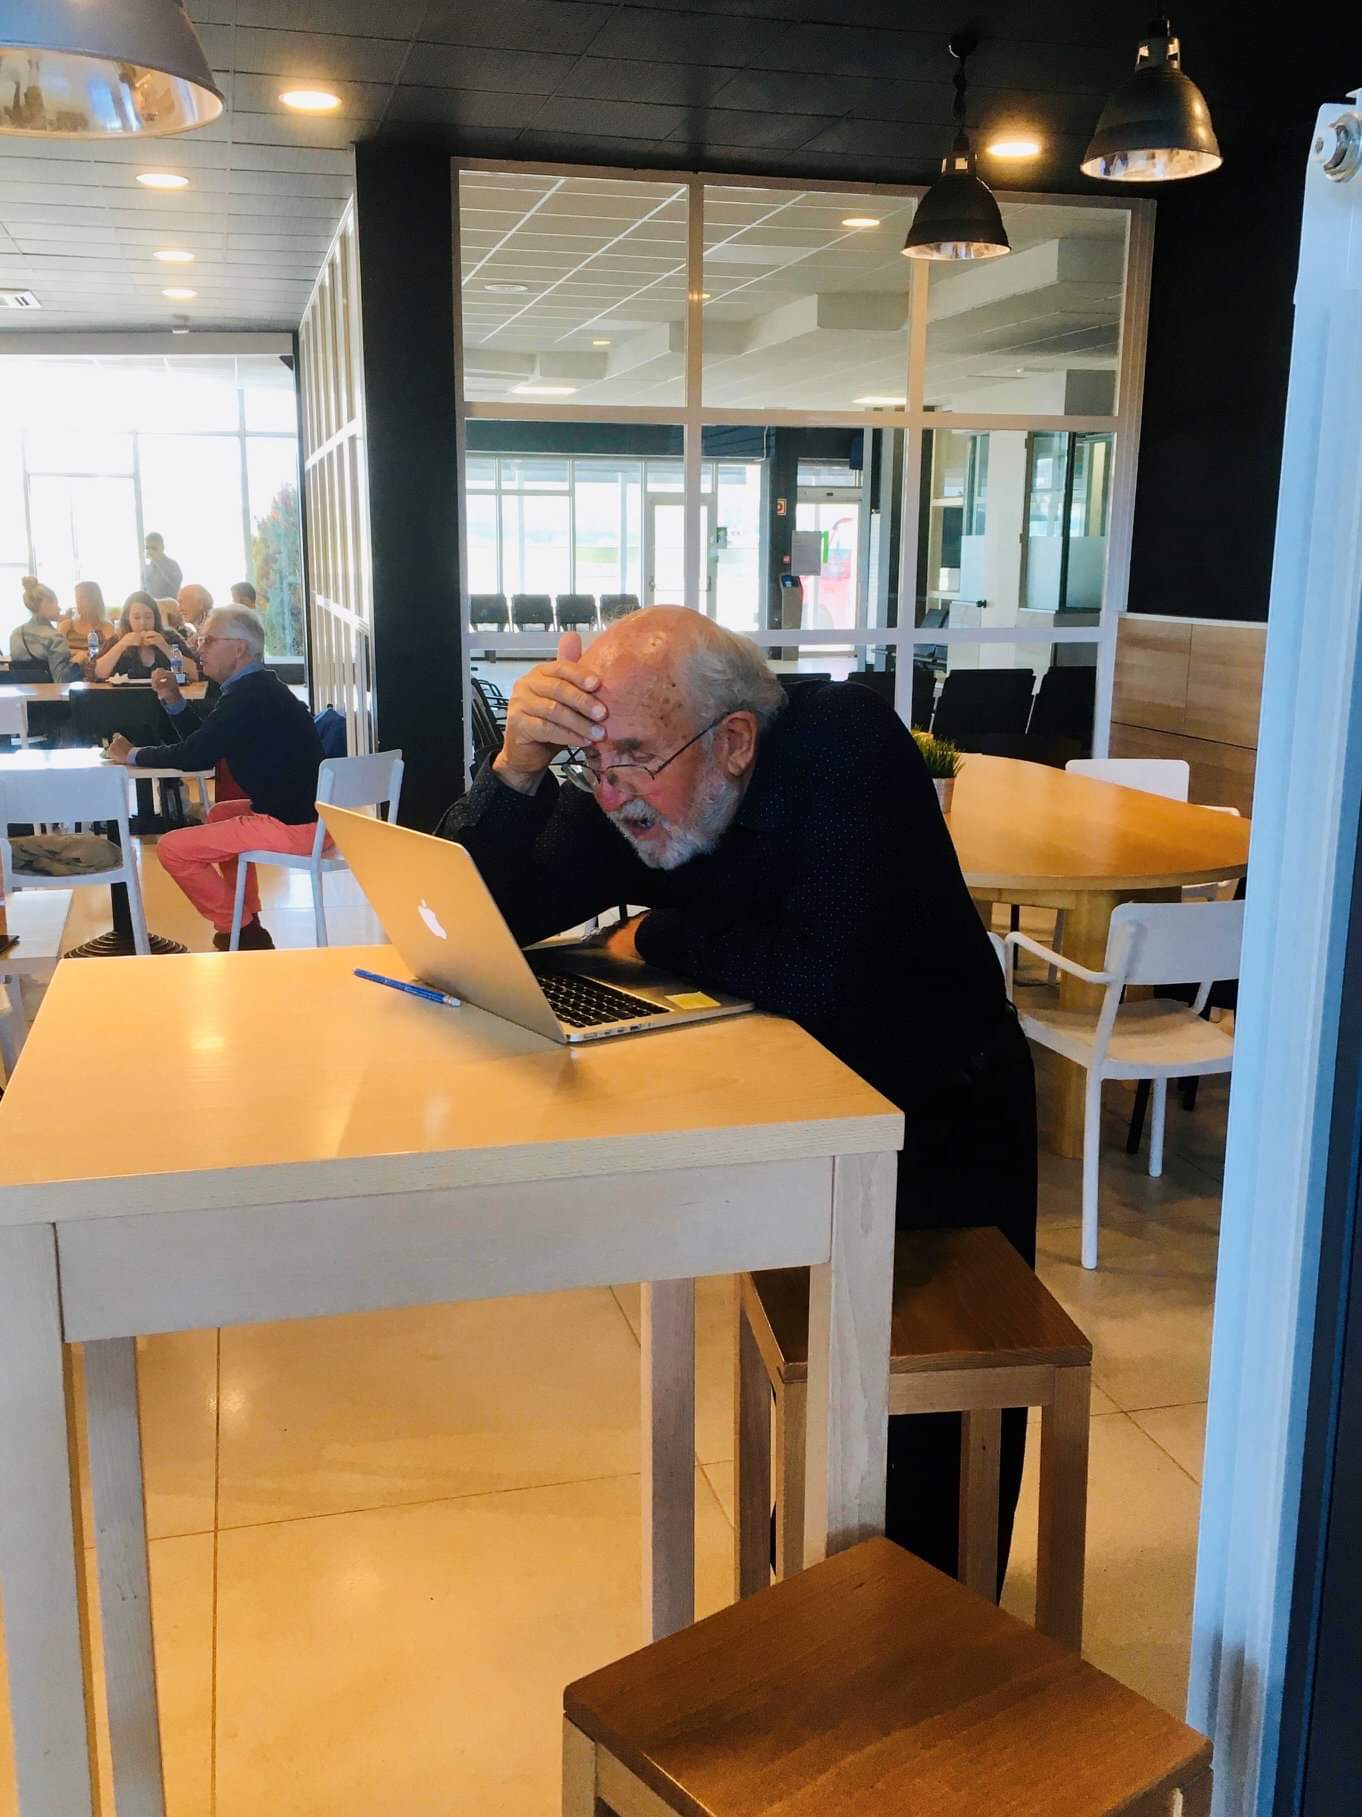 New laureate Michel Mayor was on a lecture tour in Spain when he heard the news about his Nobel Prize in Physics. Here Mayor is in the cafeteria of San Sebastian airport, looking at all the messages f